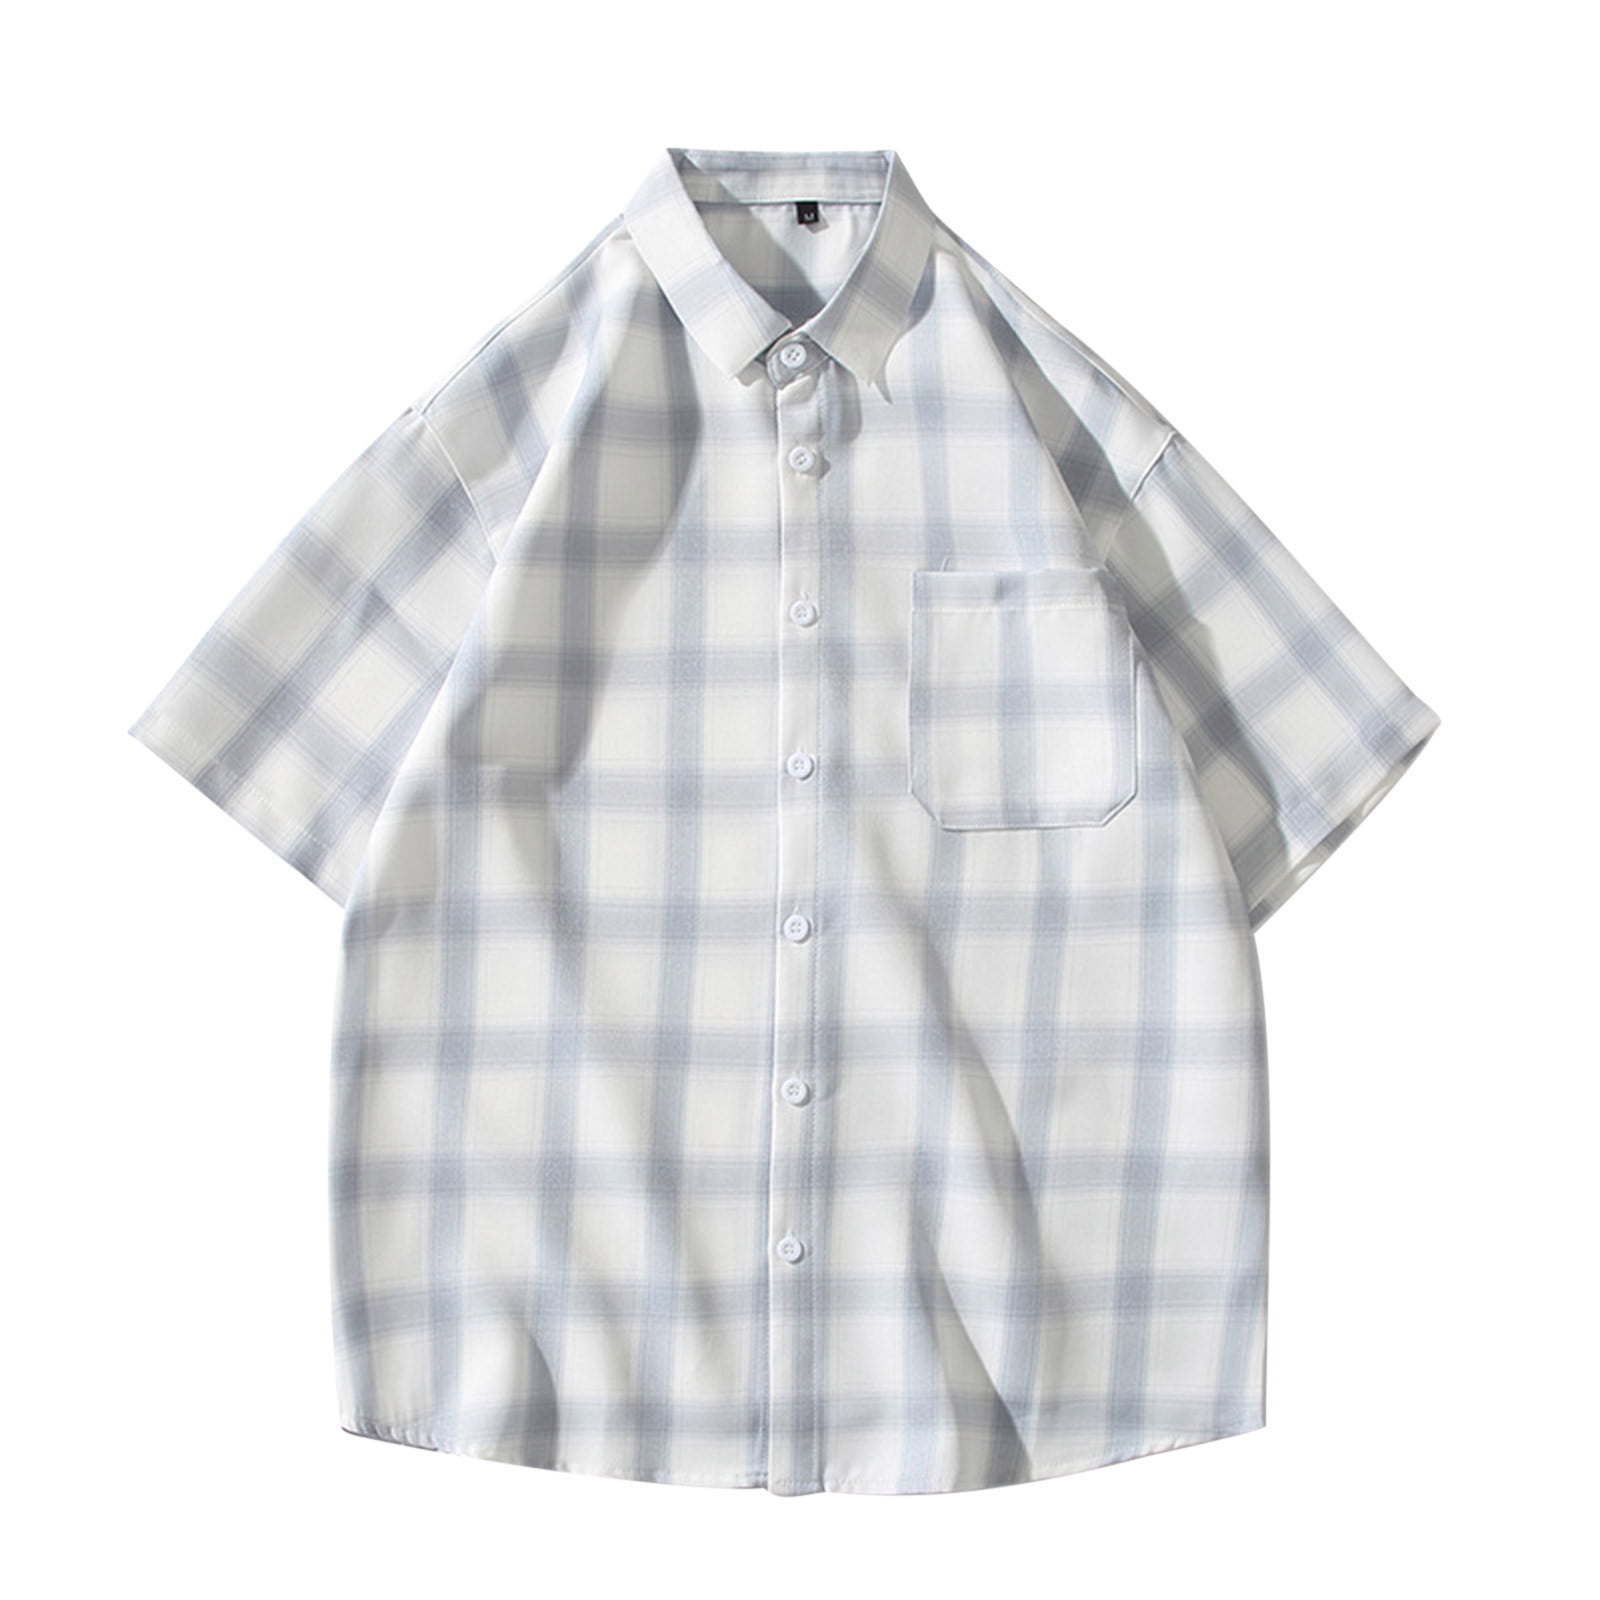 YYDGH Men's Plaid Short Sleeve Button Down Shirts Casual Cotton Classic  Dress Shirts with Pocket Blue 4XL 